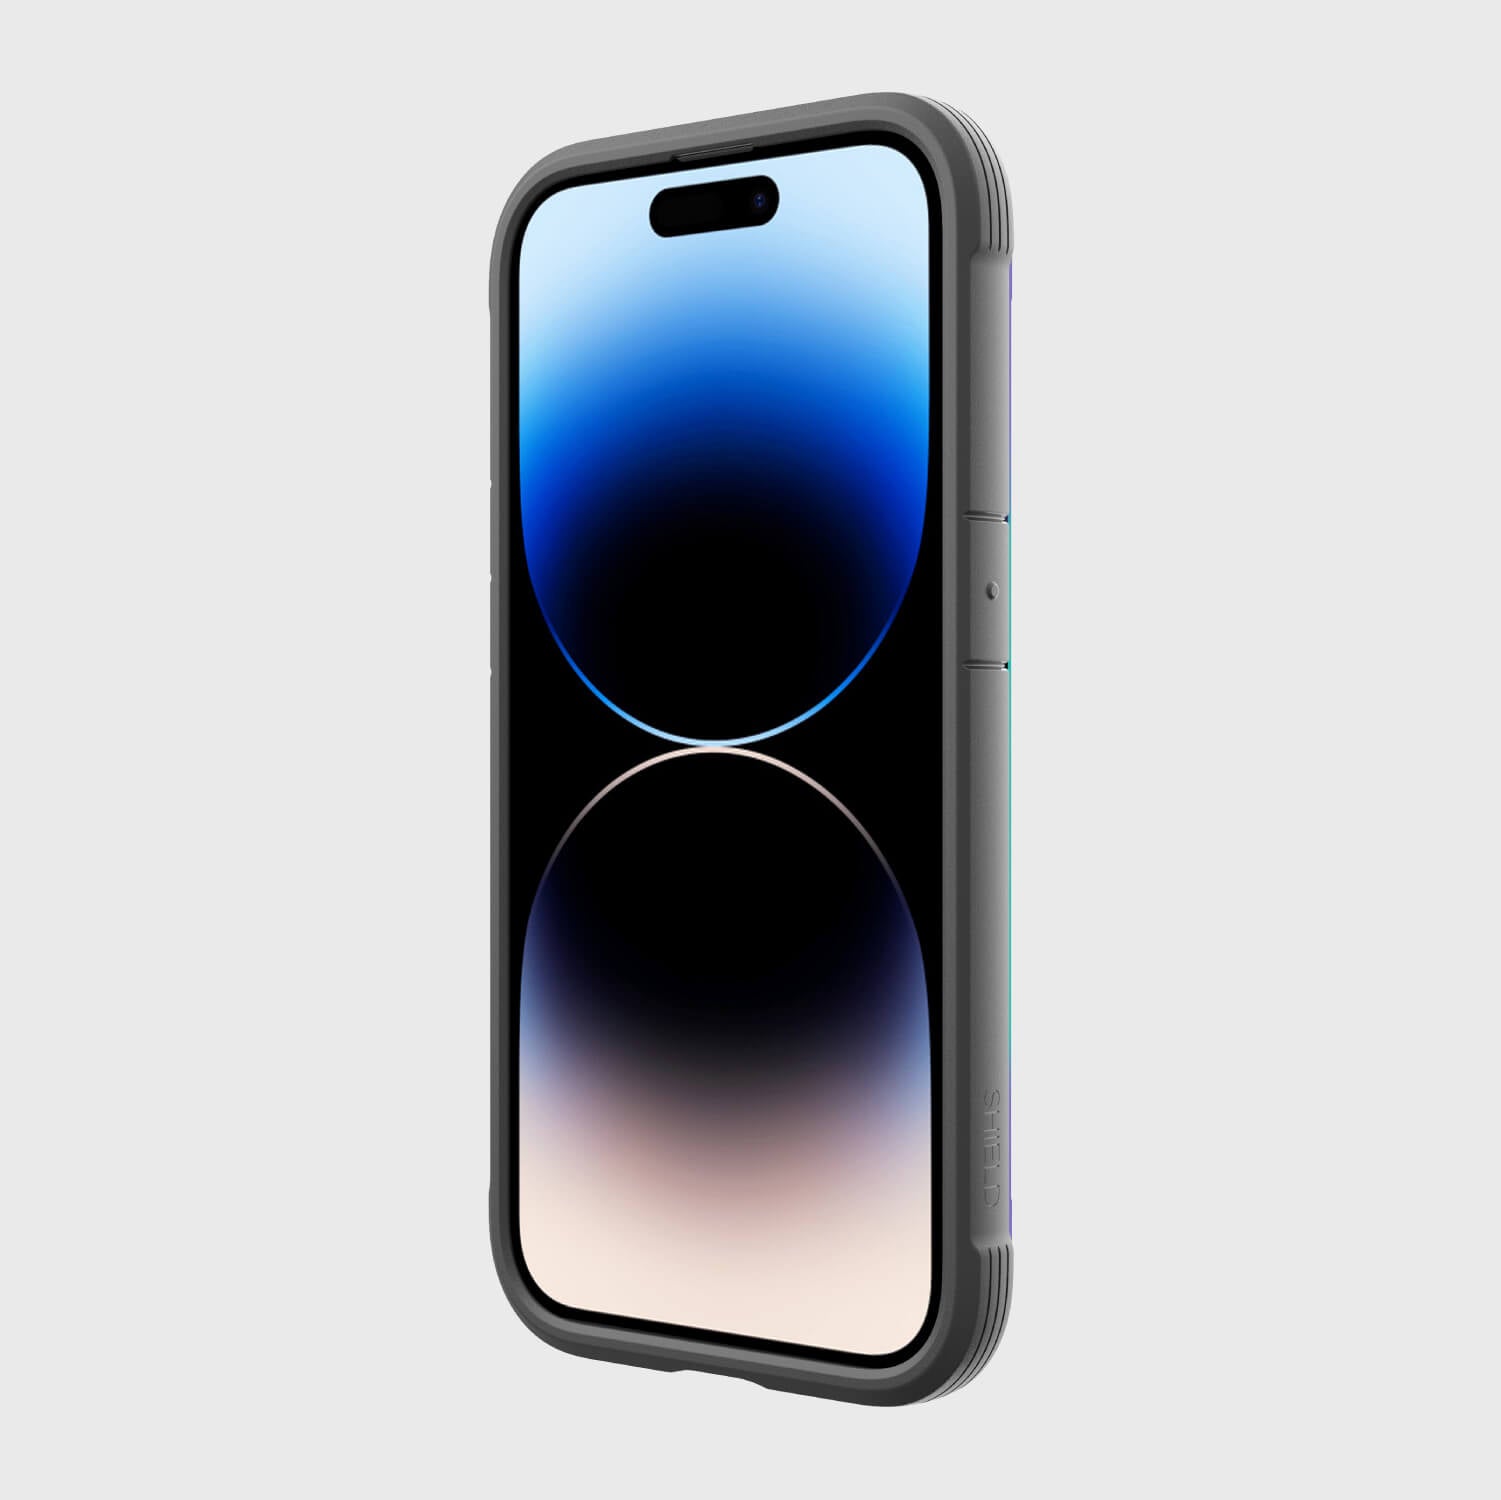 The iPhone 14 Pro Case - Shield by Raptic is shown with a blue background and is Qi charger-compatible.